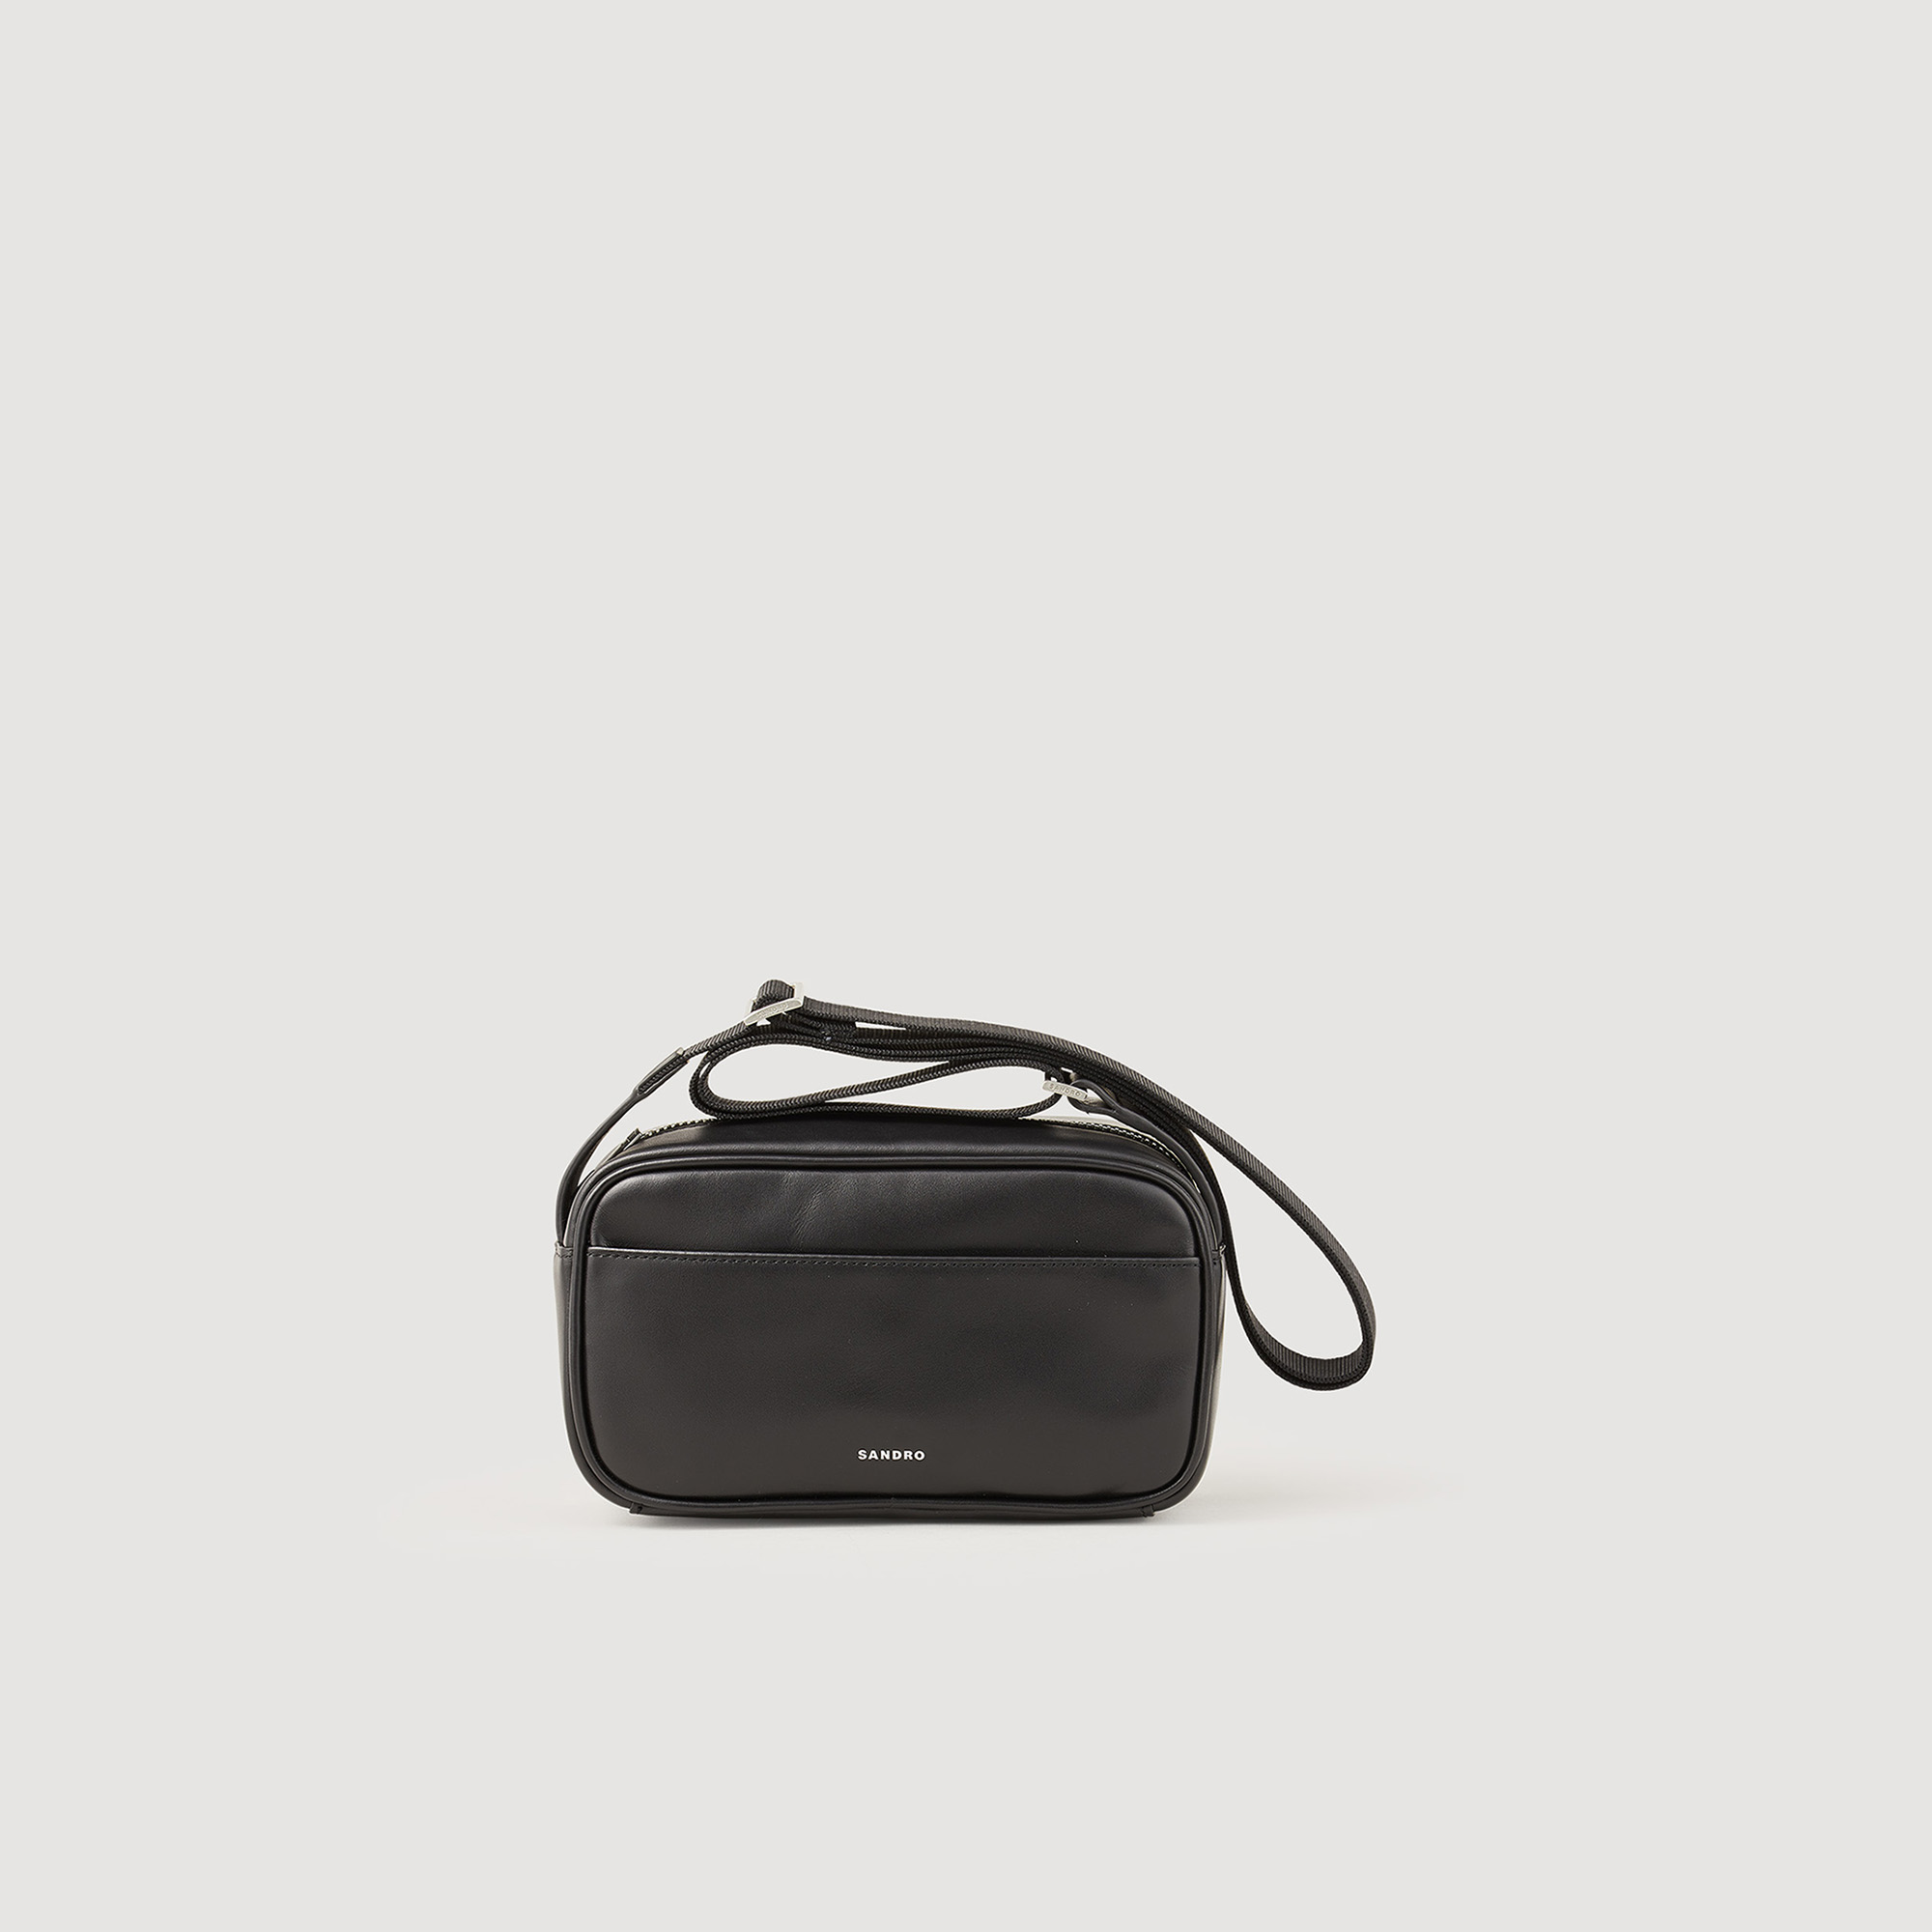 Sandro polyester Handle: Small smooth leather bag with a long adjustable shoulder strap in technical fabric